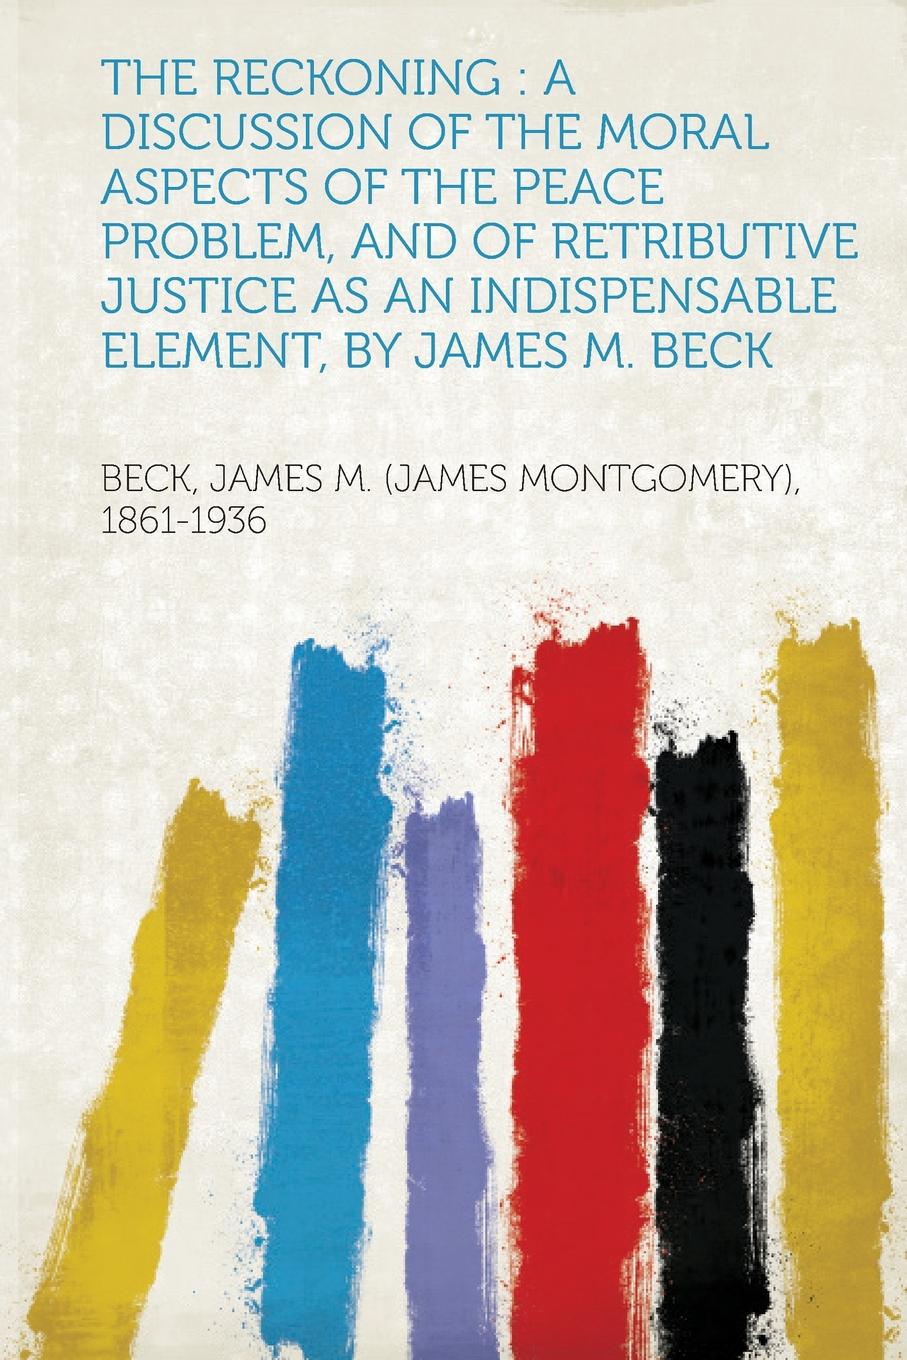 The Reckoning. A Discussion of the Moral Aspects of the Peace Problem, and of Retributive Justice as an Indispensable Element, by Jam